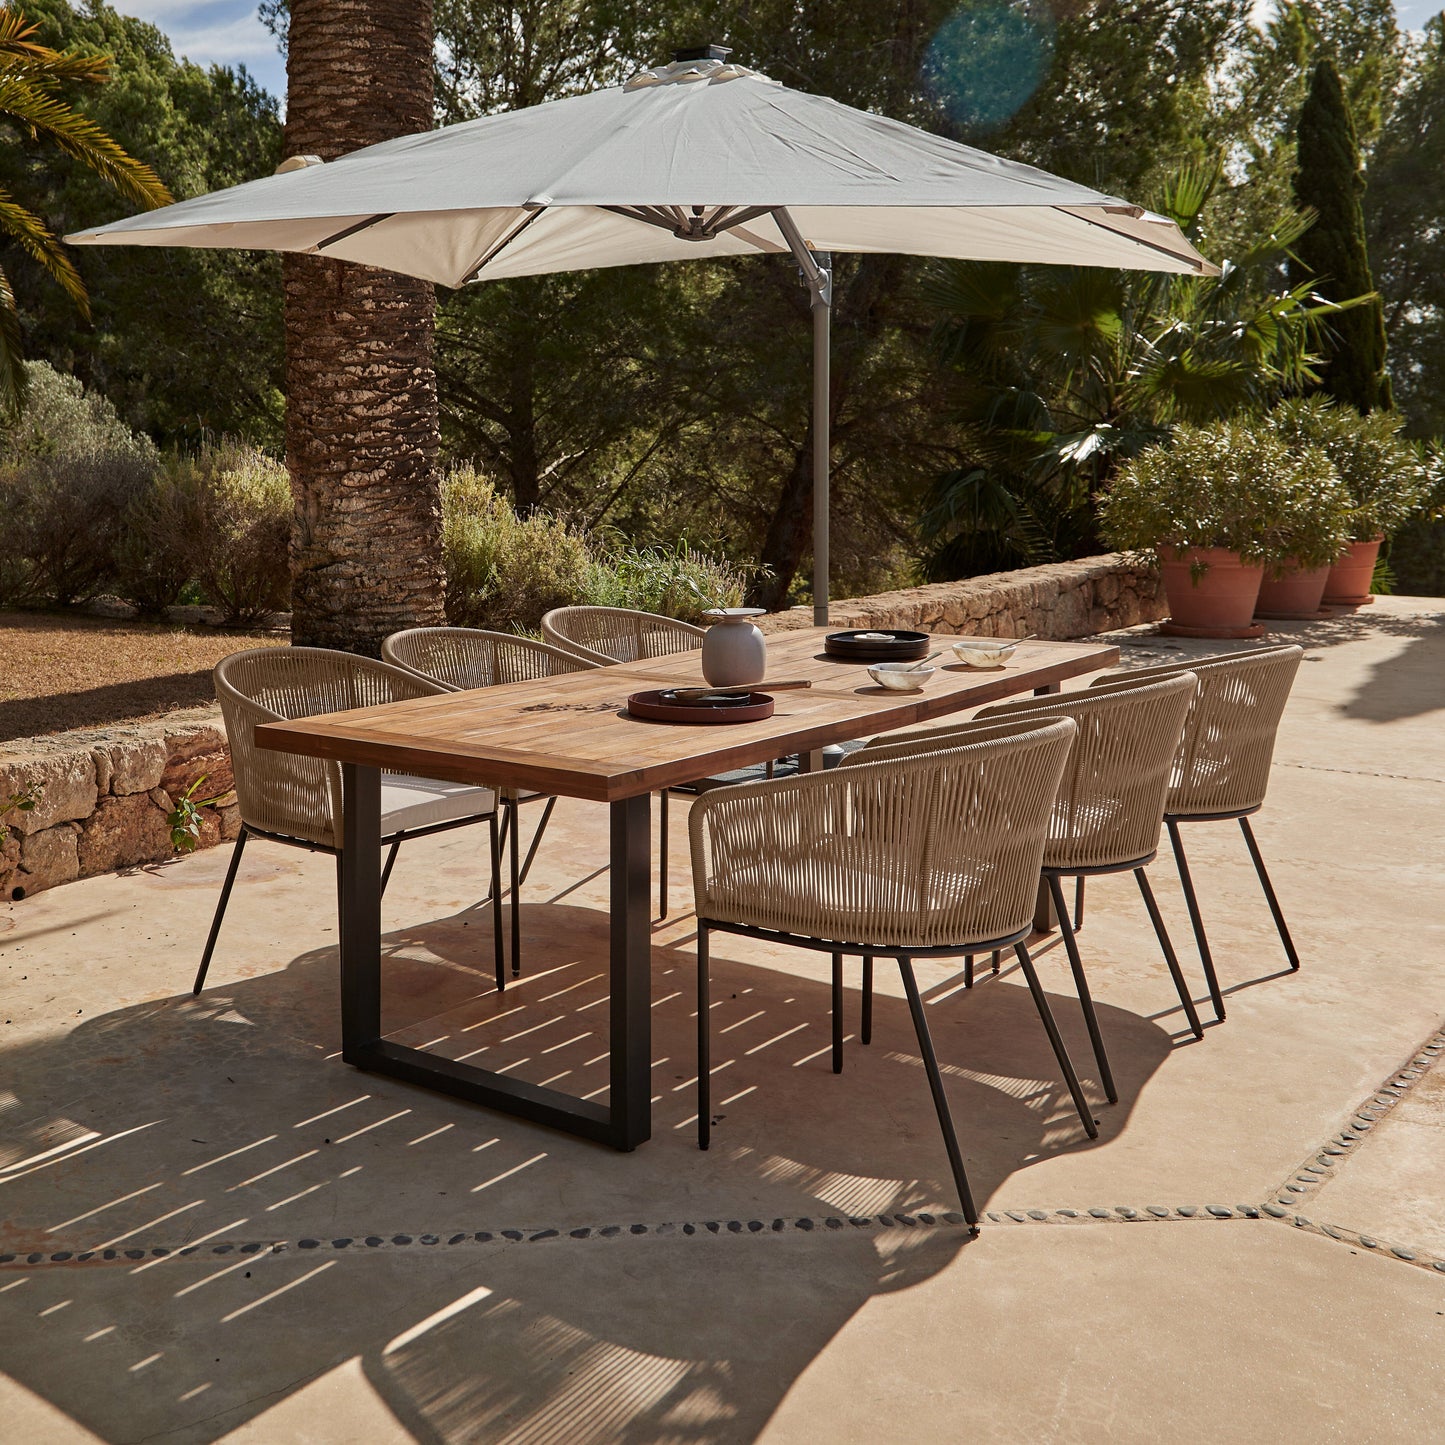 Hali 6 Seater Wooden Outdoor Dining Set with Hali Natural Chairs & Cream Premium Cantilever Parasol - 235cm